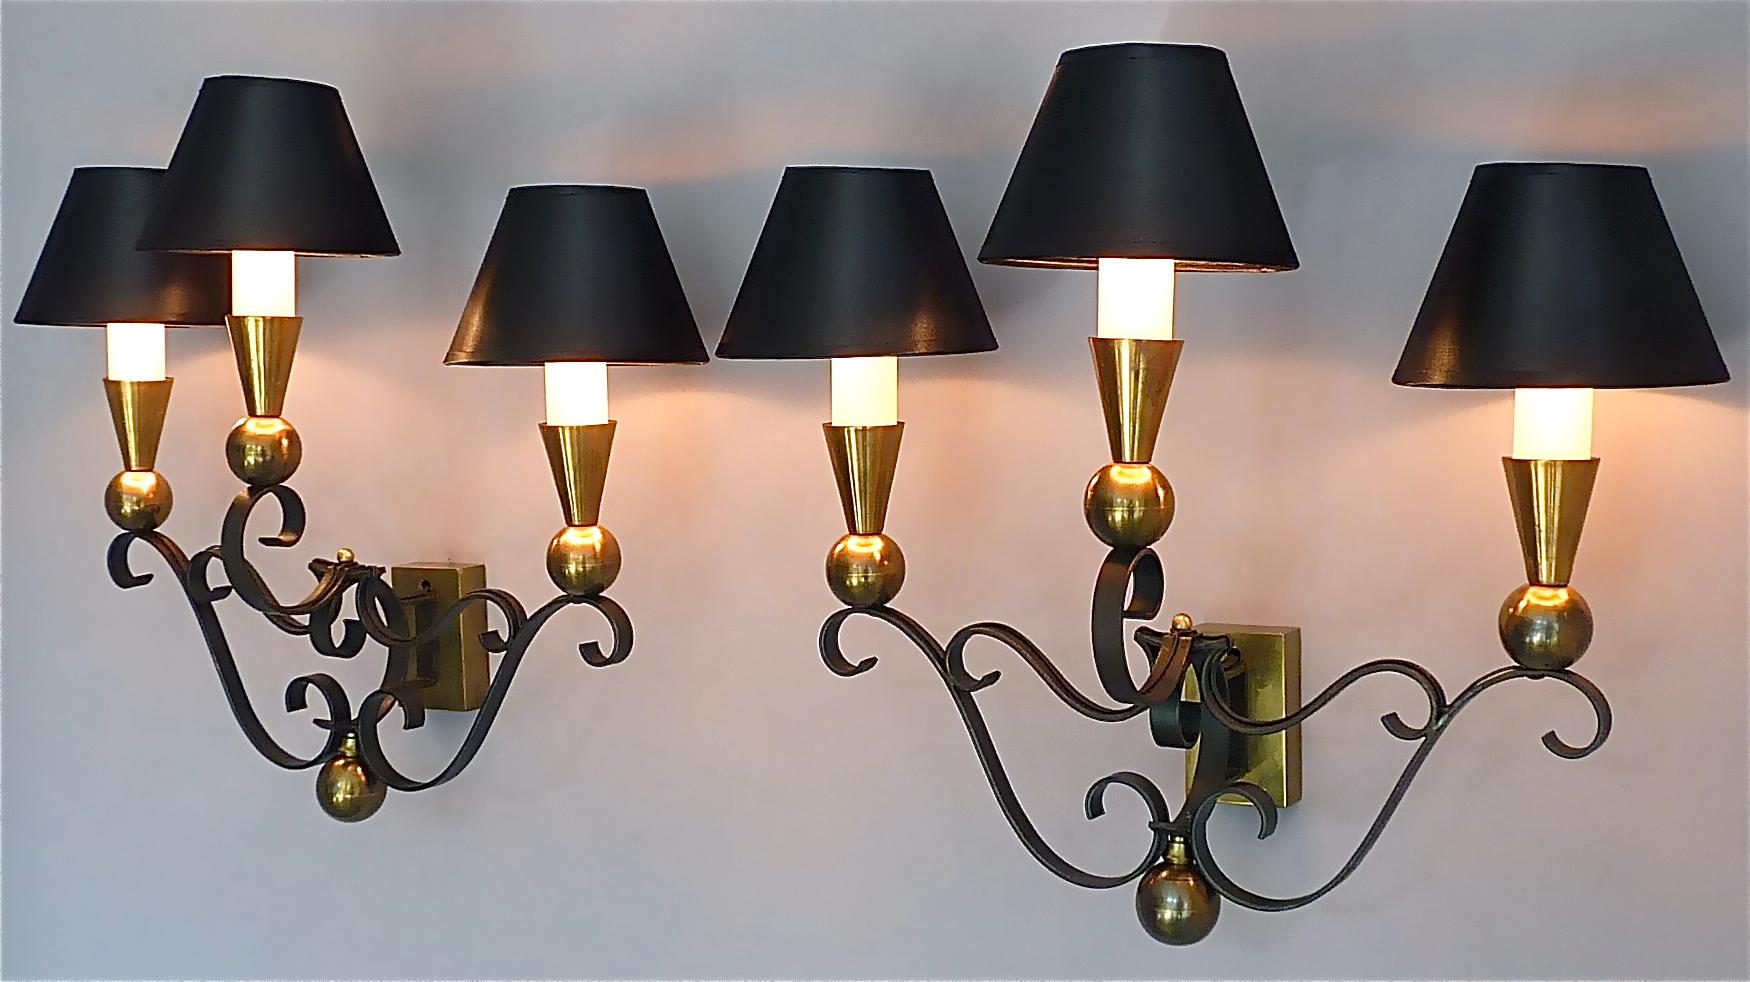 3 Rare Sconces Poillerat Adnet Style Black Forged Iron Brass Gold France 1950s For Sale 9